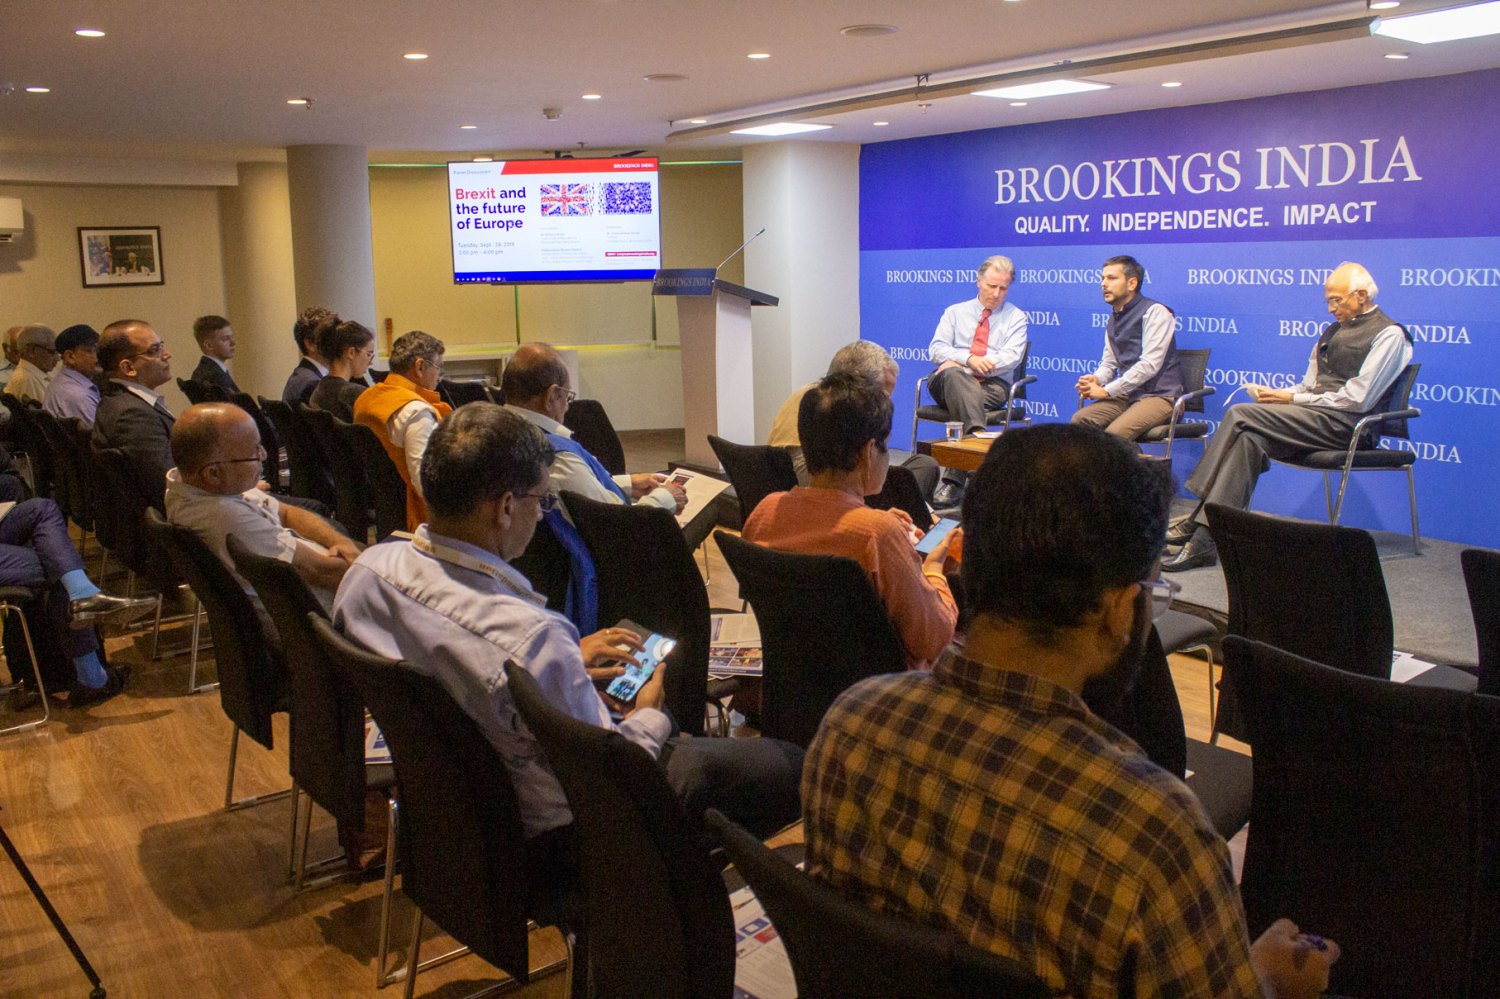 Sir Oliver Letwin, Conservative Member of Parliament for West Dorset, Dr. Constantino Xavier, Fellow, Foreign Policy, Brookings India and   Ambassador Ranjan Mathai, former Indian Foreign Secretary (2011–2013) and High Commissioner to the United Kingdom (2013–2015) at an event on Brexit